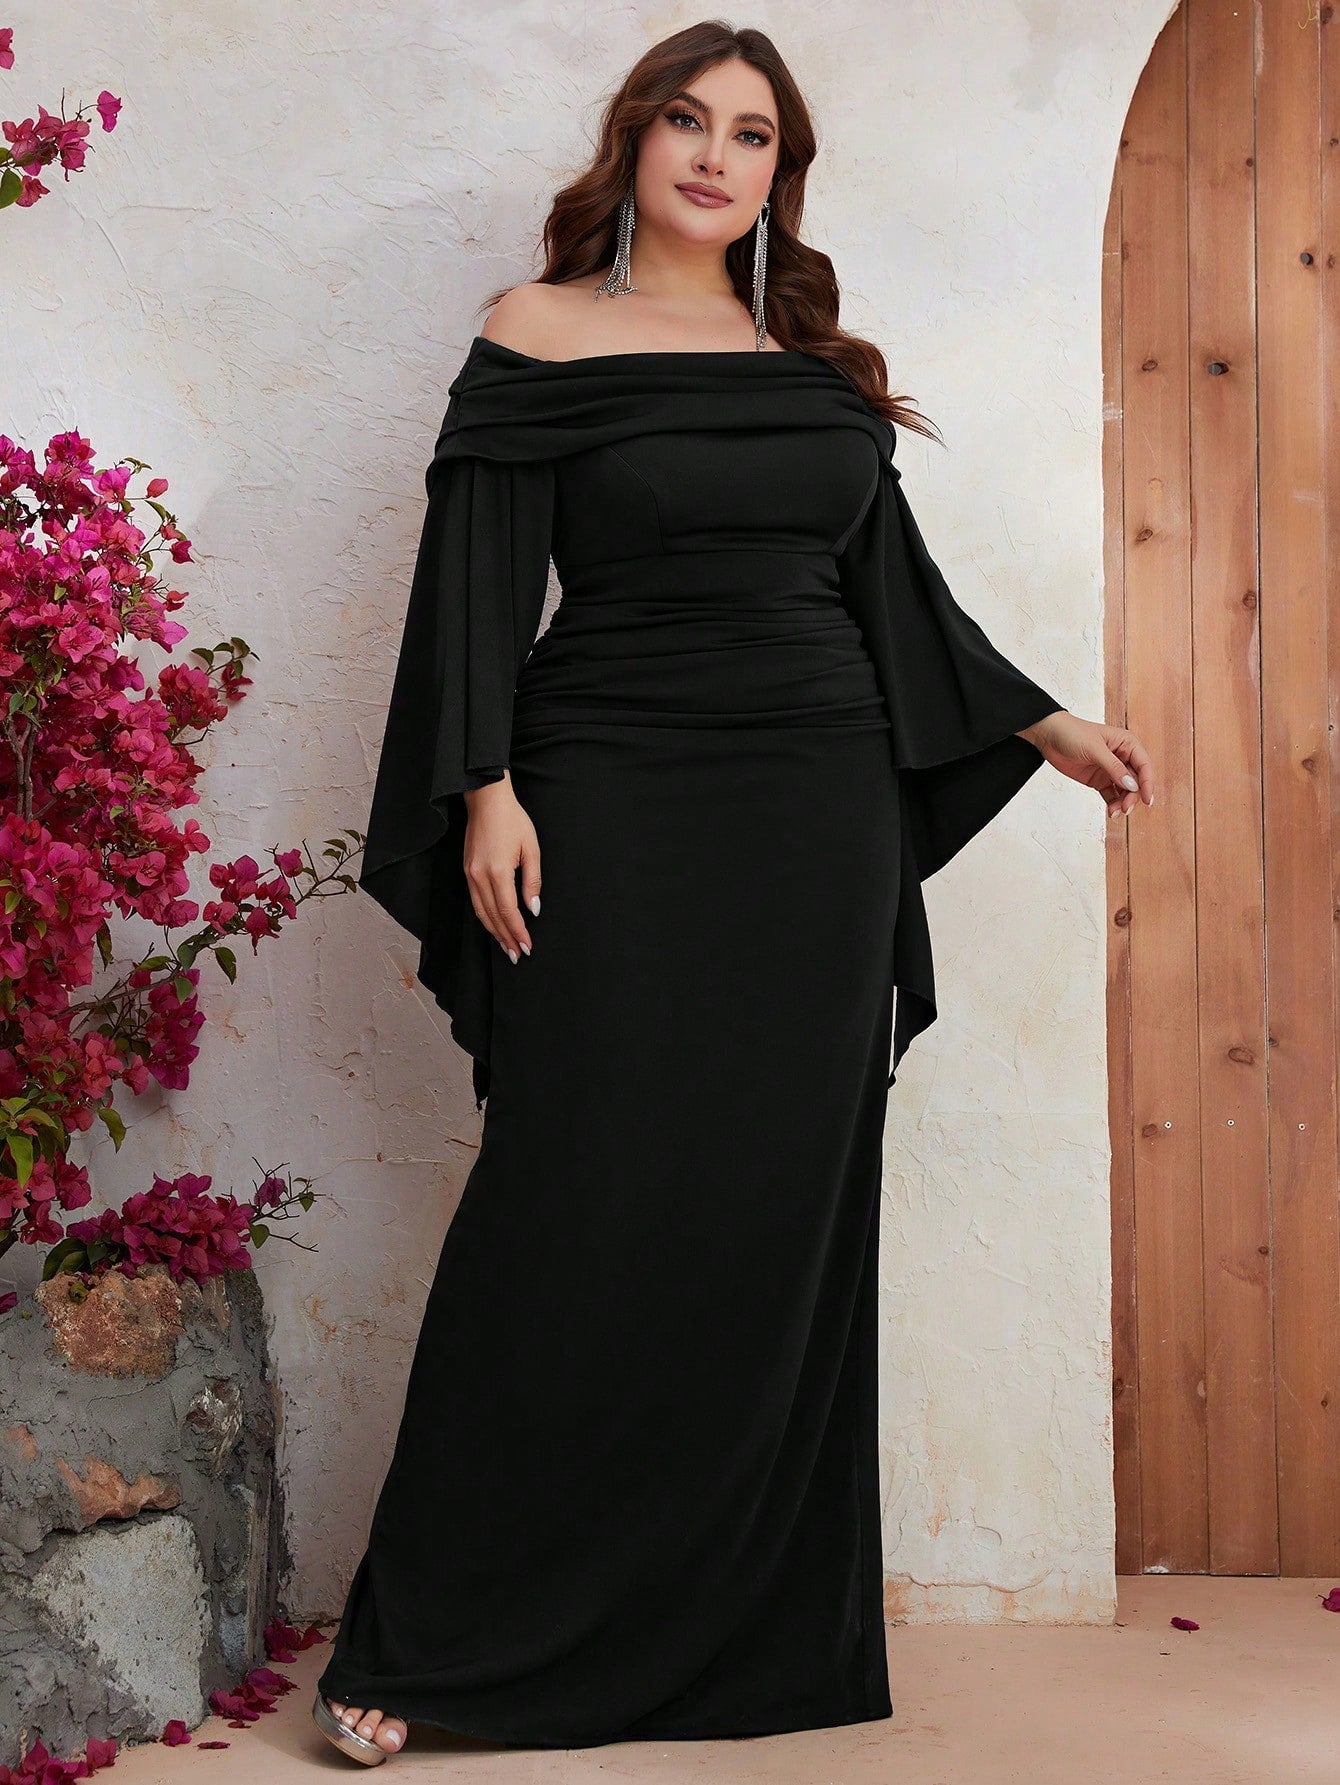 Stunning Off-Shoulder Full-Length Plus Size Dress with Flared Sleeves and Ruched Detail - Alluring and Sophisticated Evening Wear